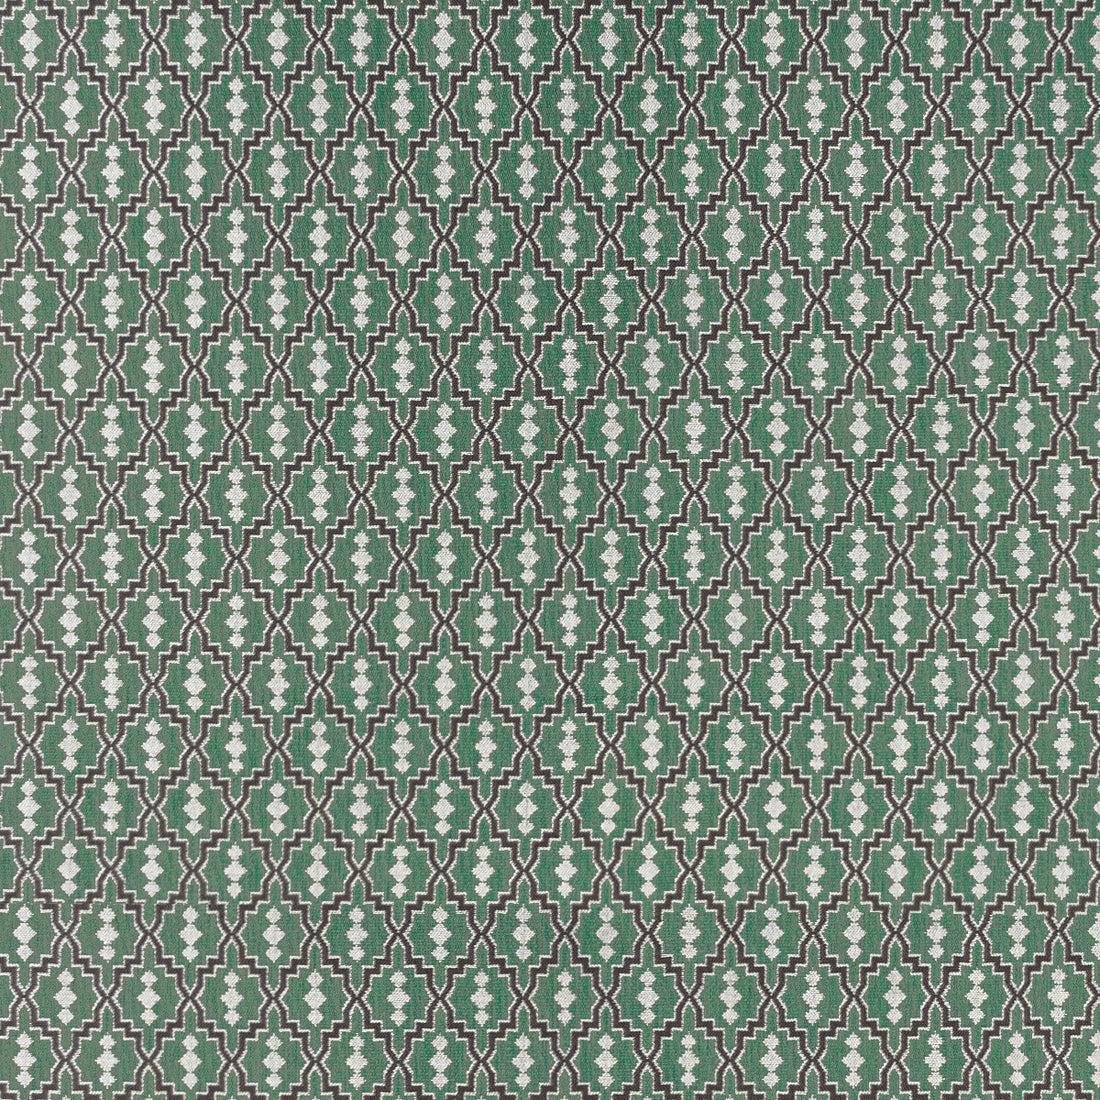 Aztec fabric in verde oscuro color - pattern GDT5152.008.0 - by Gaston y Daniela in the Gaston Rio Grande collection